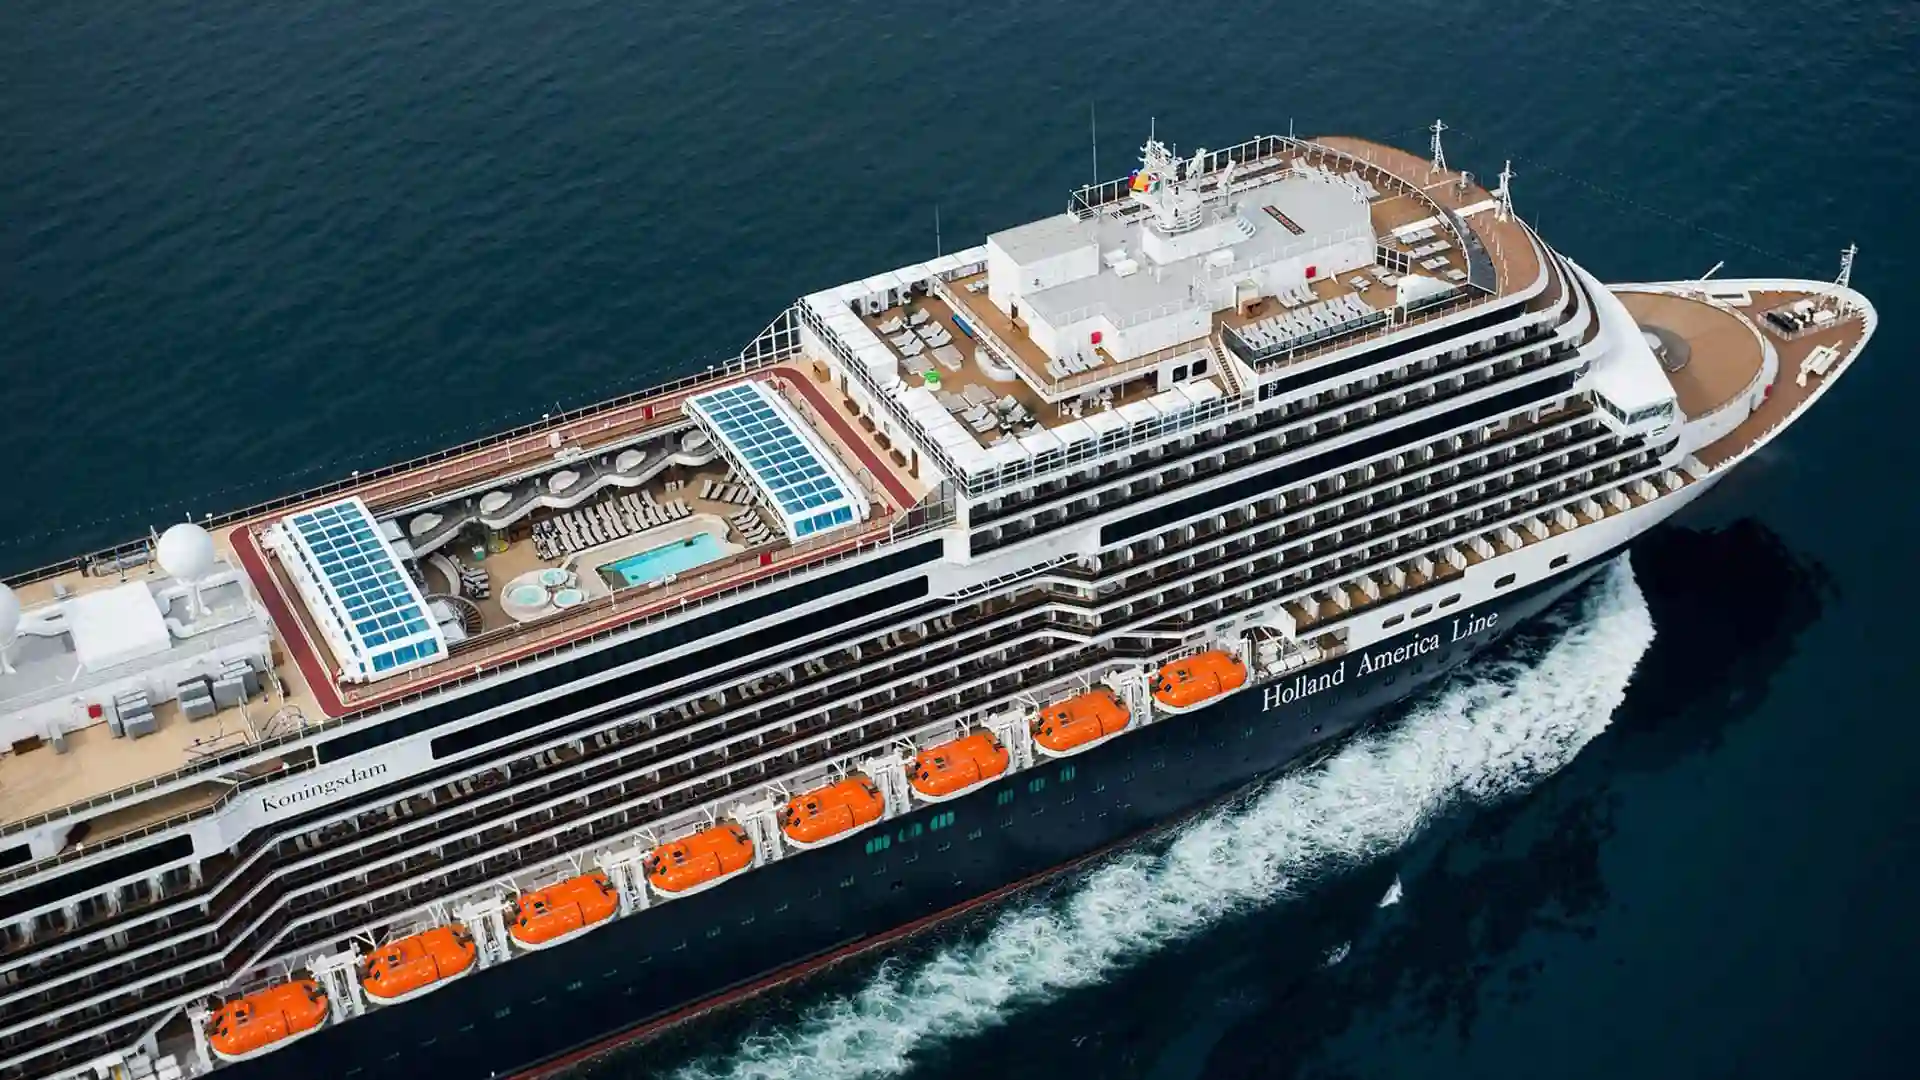 Aerial view of Holland America Line cruise ship.